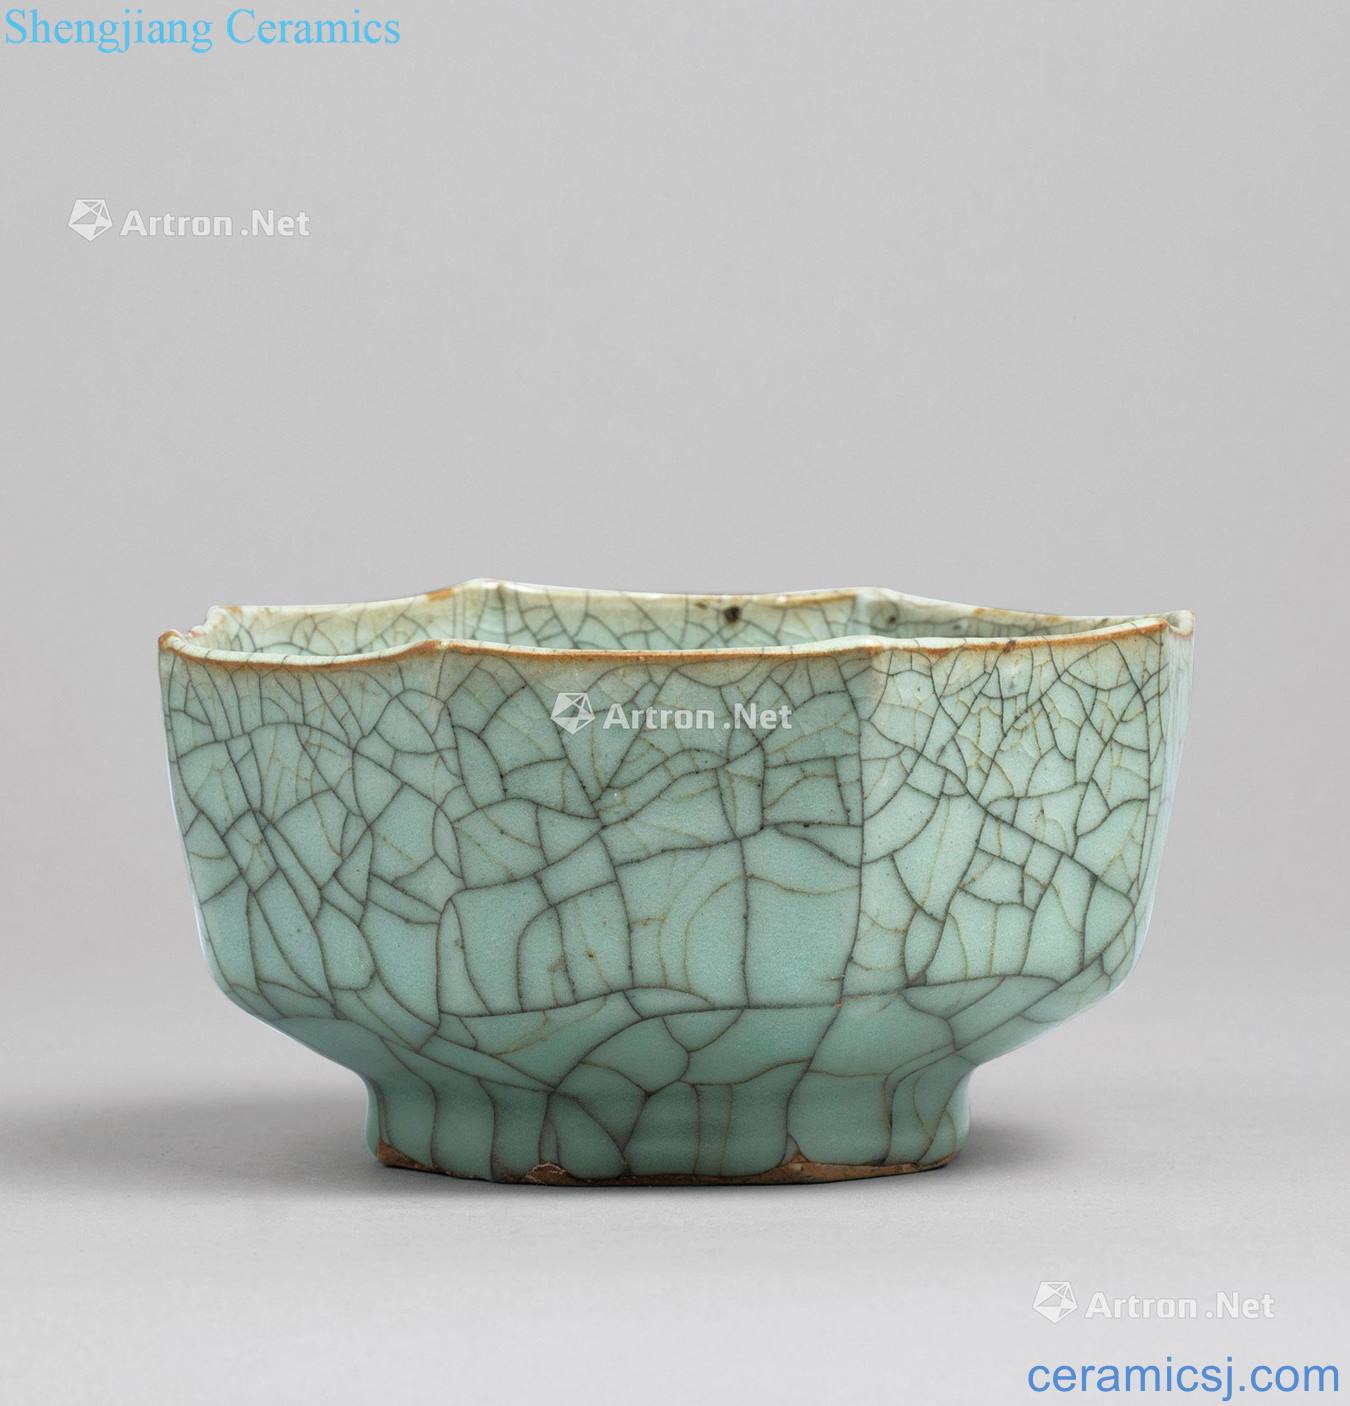 The song dynasty Kiln anise bowl